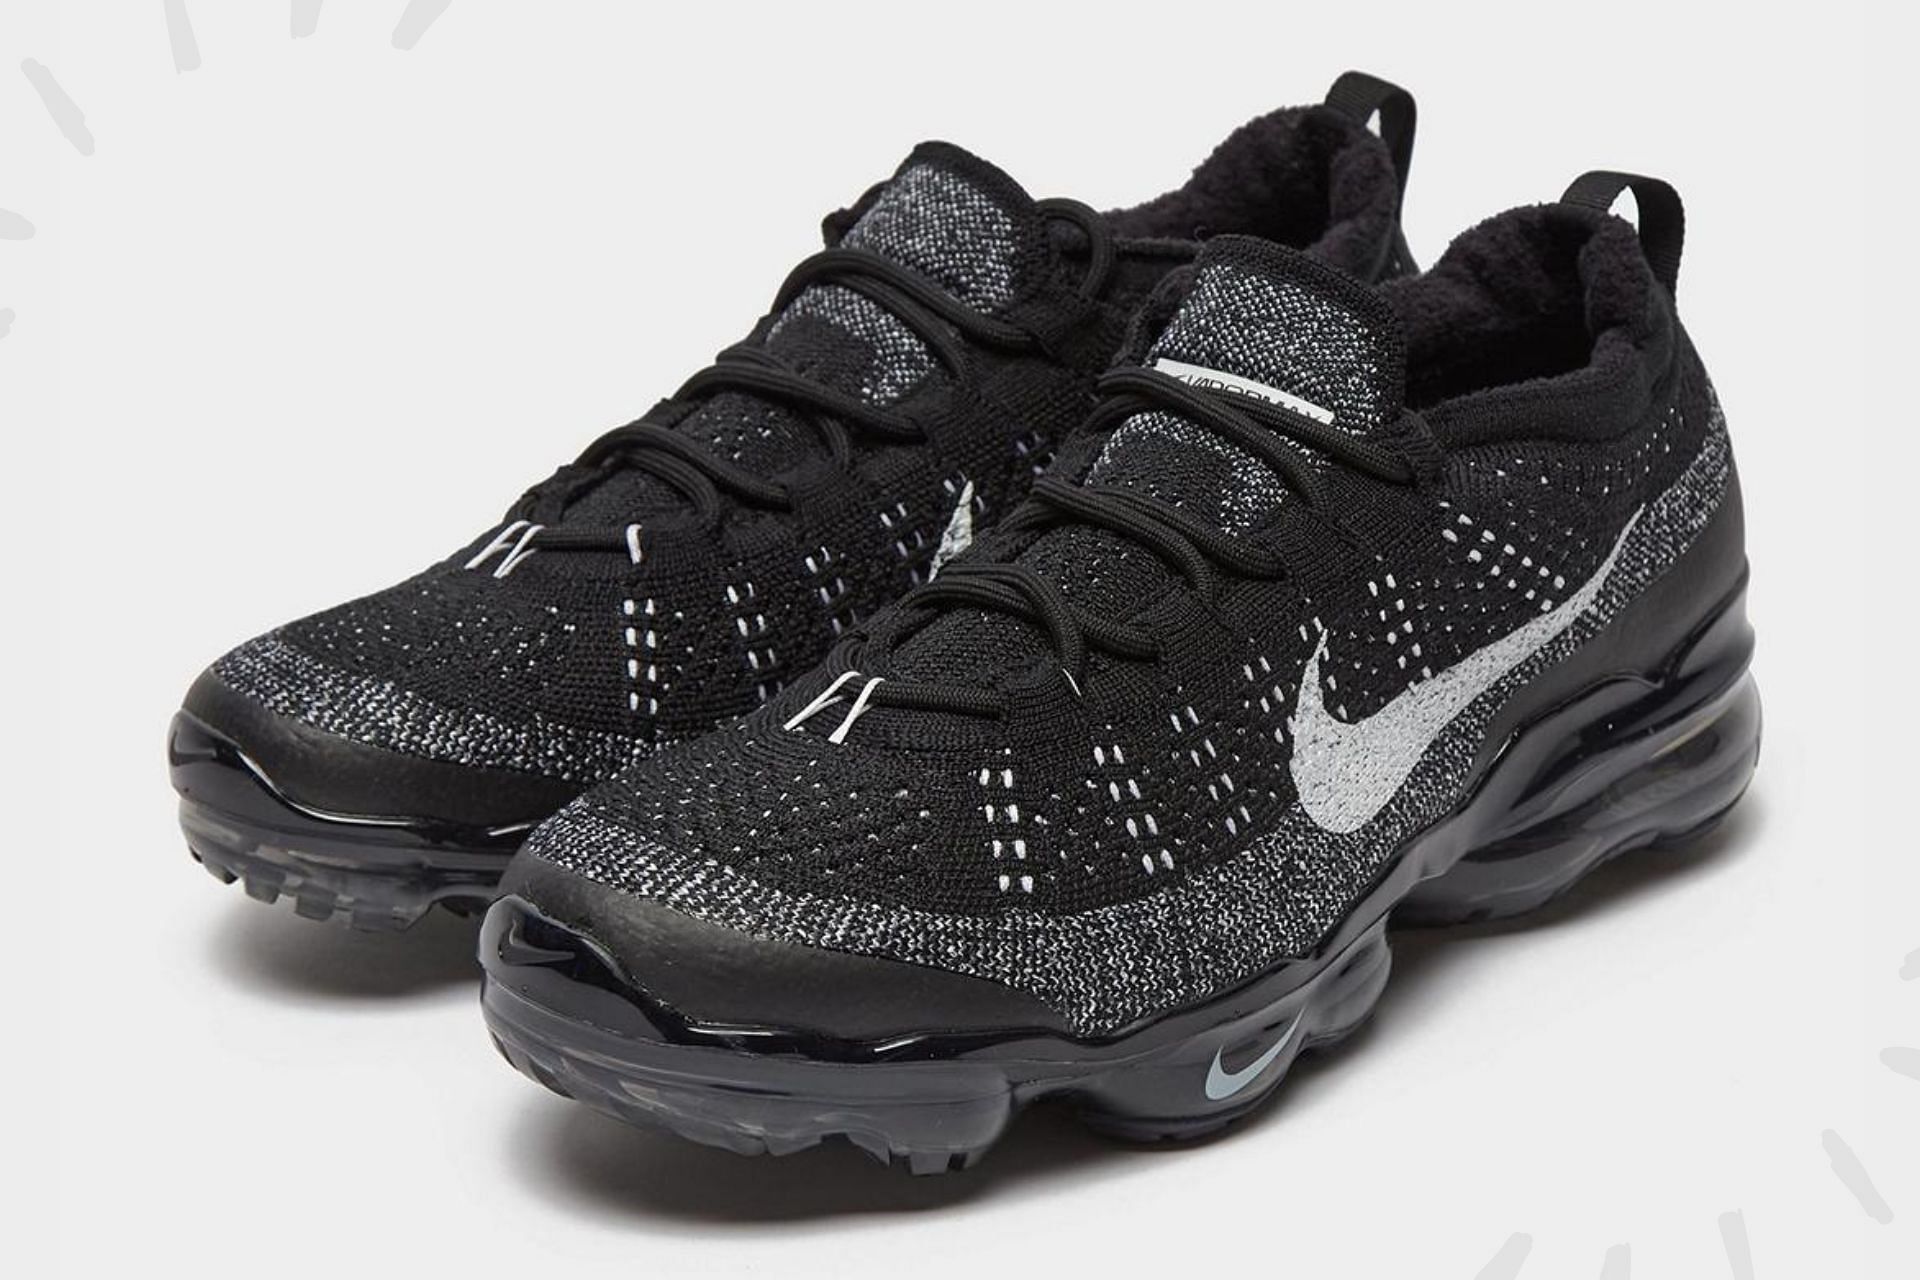 Vapormax 2023 Flyknit “Black/White” sneakers: Where to buy, release date, and explored